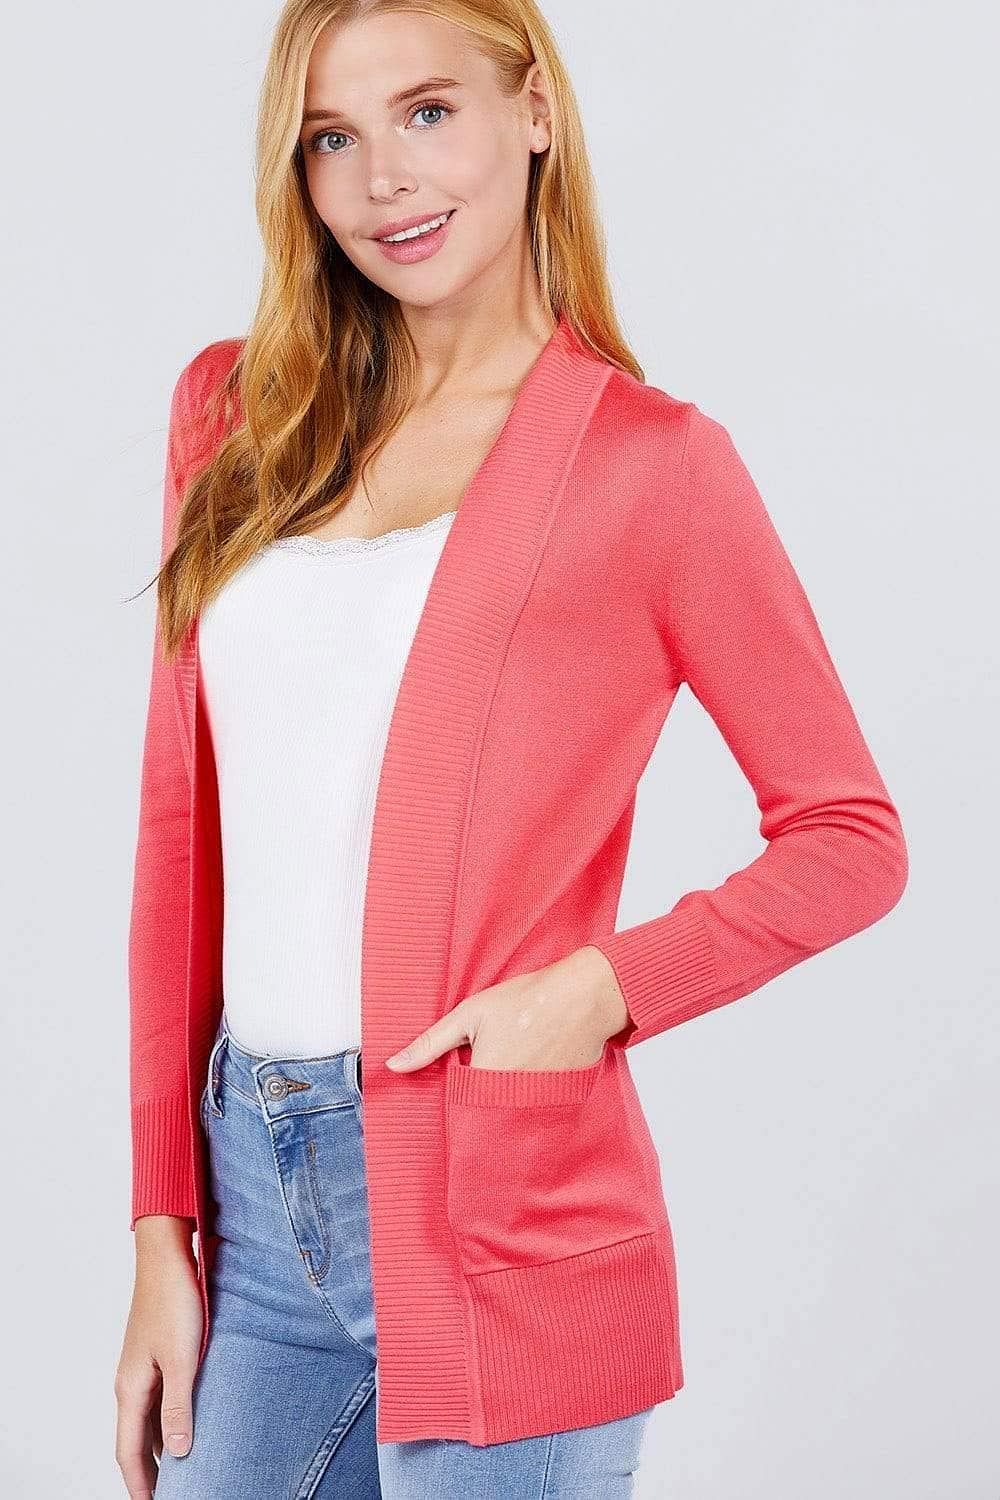 Coral Long Sleeve Open Front Rib Knit Cardigan - Shopping Therapy Cardigan